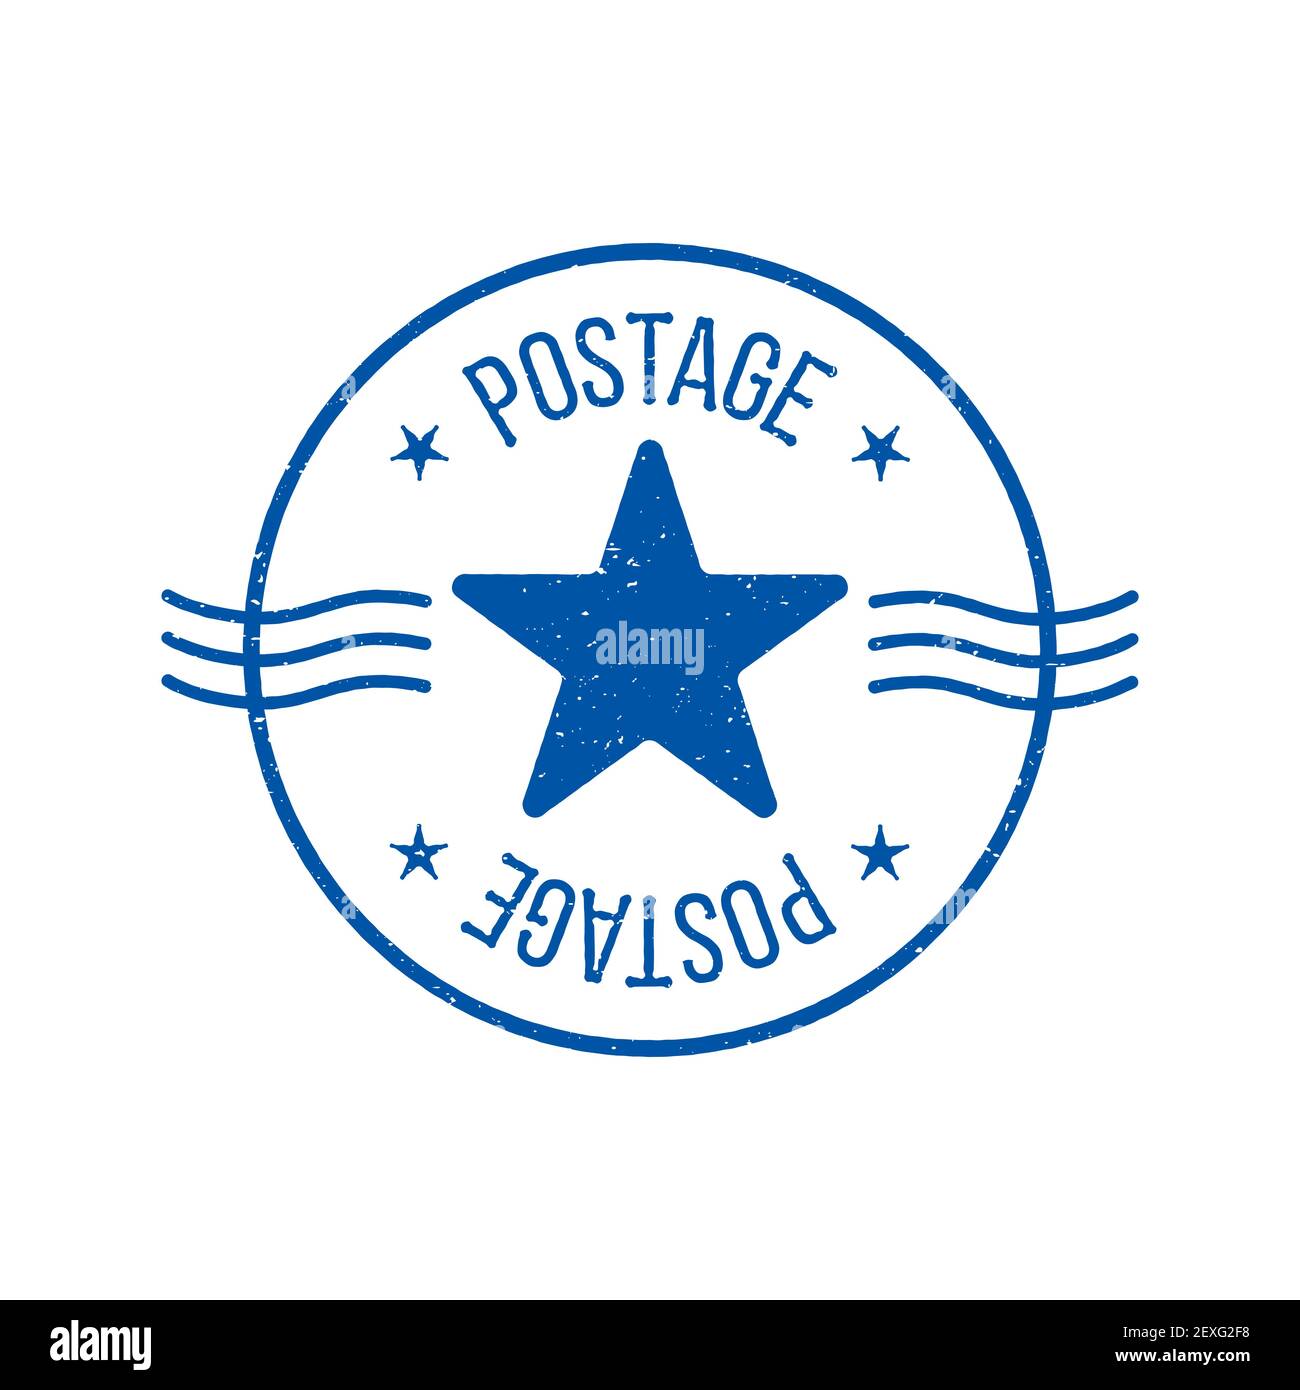 Distressed postal stamp vector illustration. Round shape blue postage stamp, with star and waves. Stock Vector